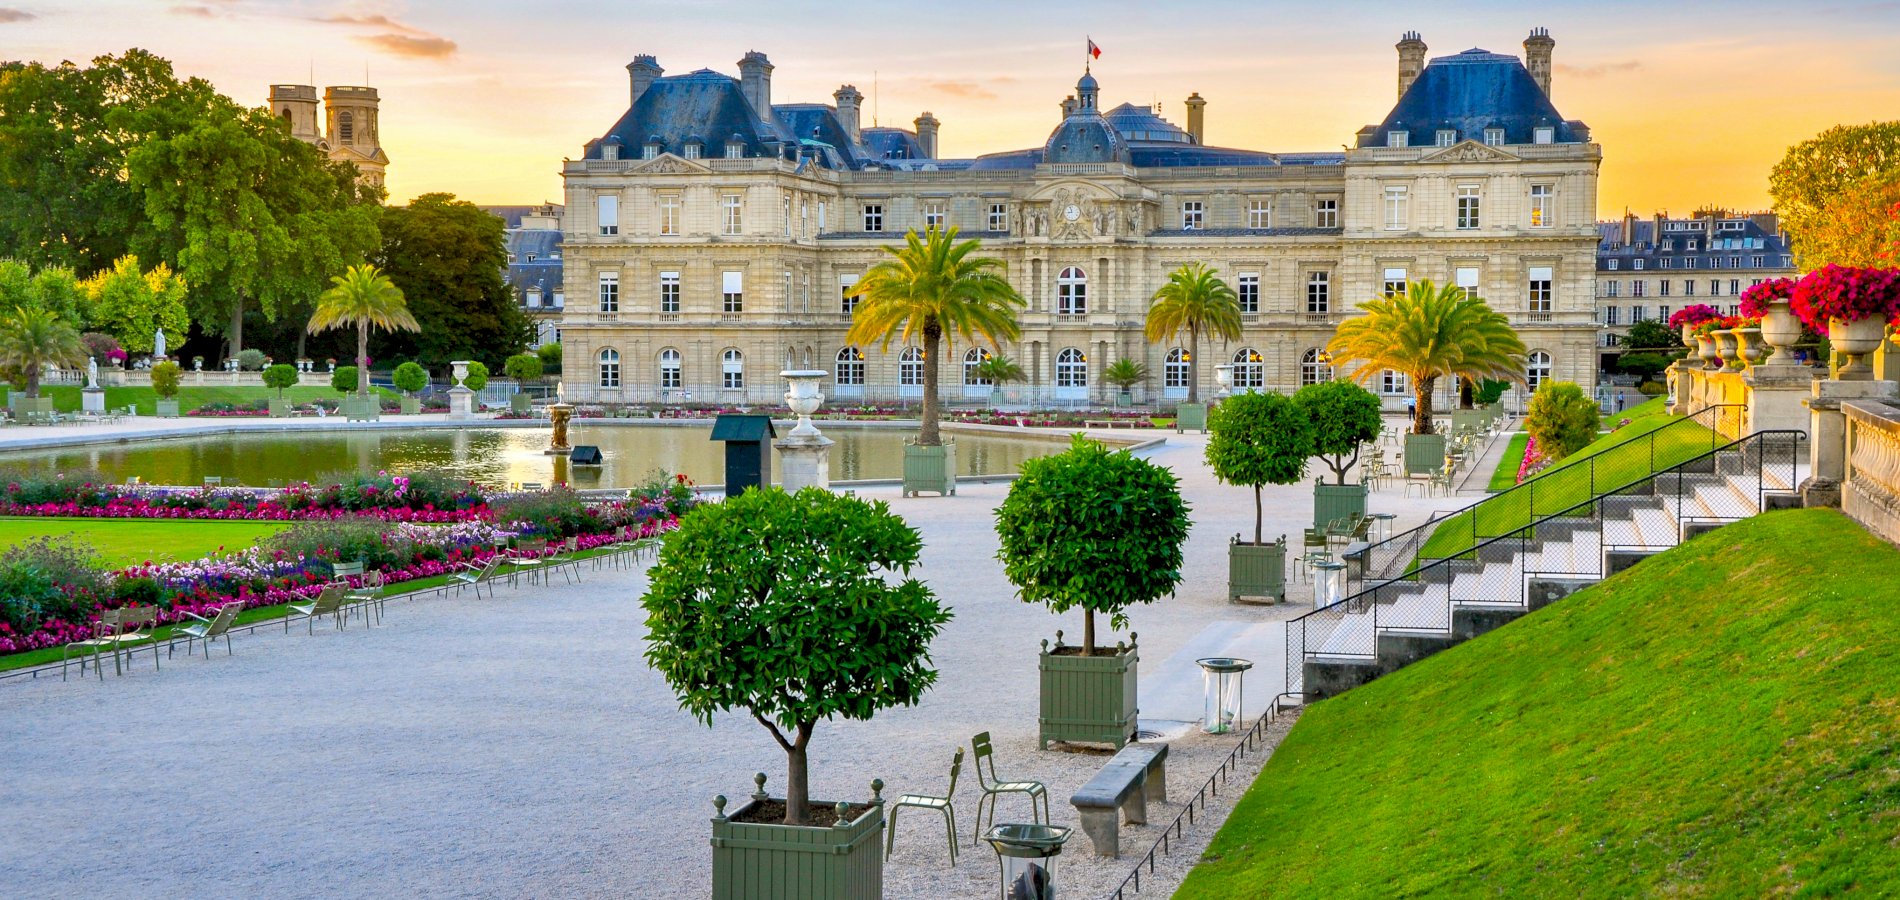 Ophorus Tours - A Private Shore Excursion from Rouen to Versailles Palace & Gardens 